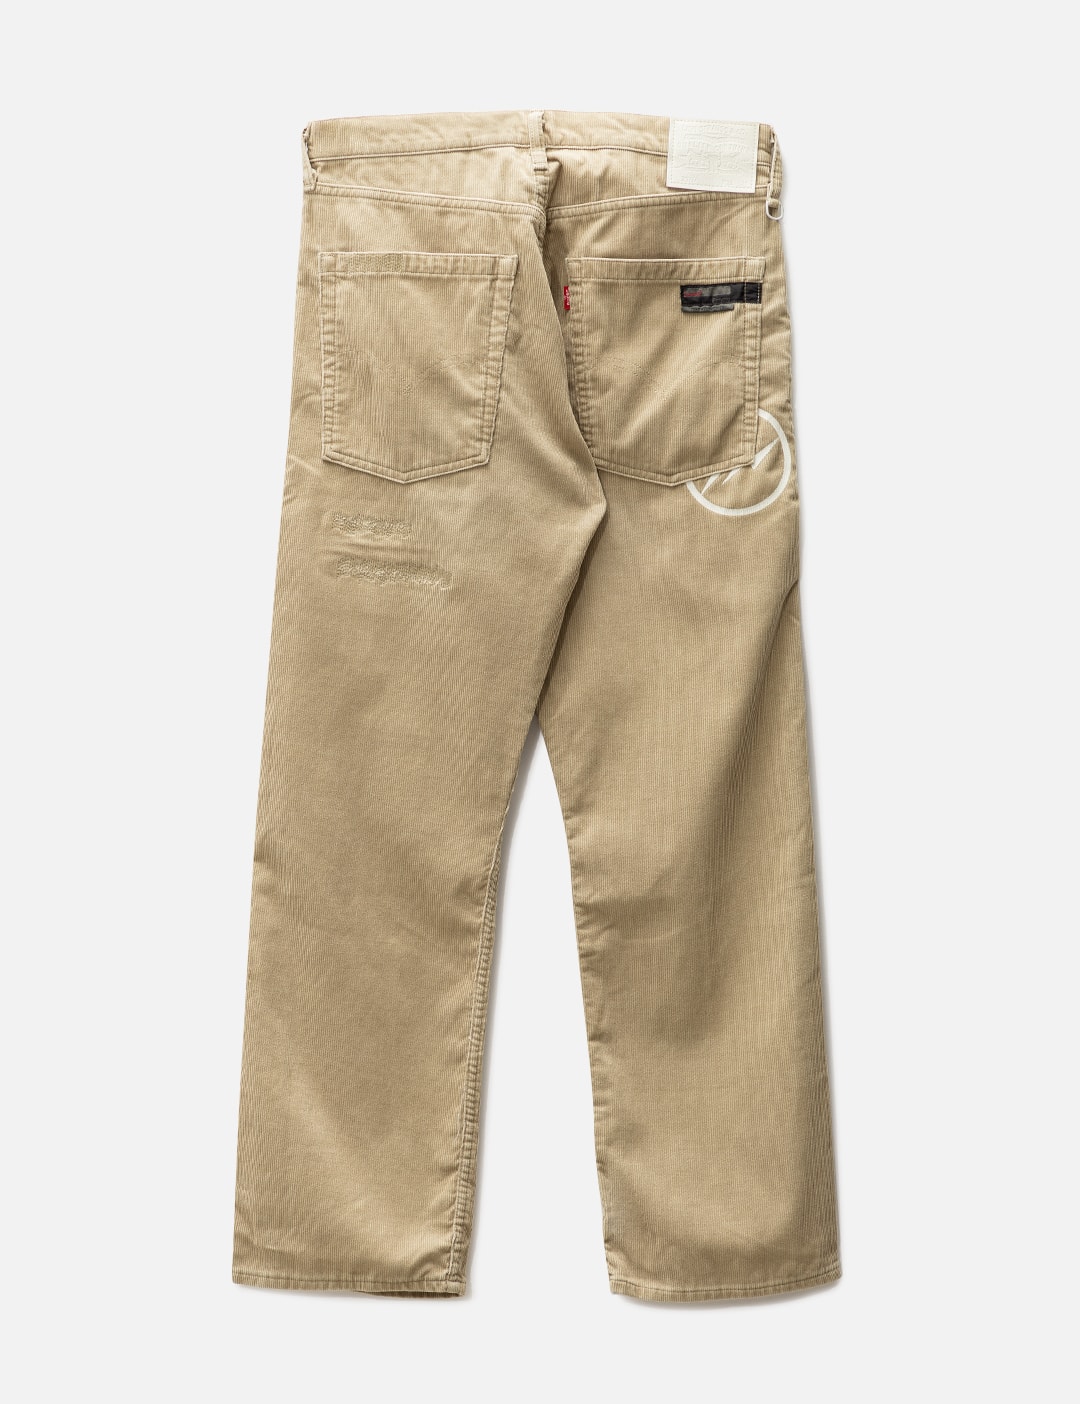 Levi's - Levi's Fenom x Fragment Design Corduroy Pants | HBX - Globally  Curated Fashion and Lifestyle by Hypebeast